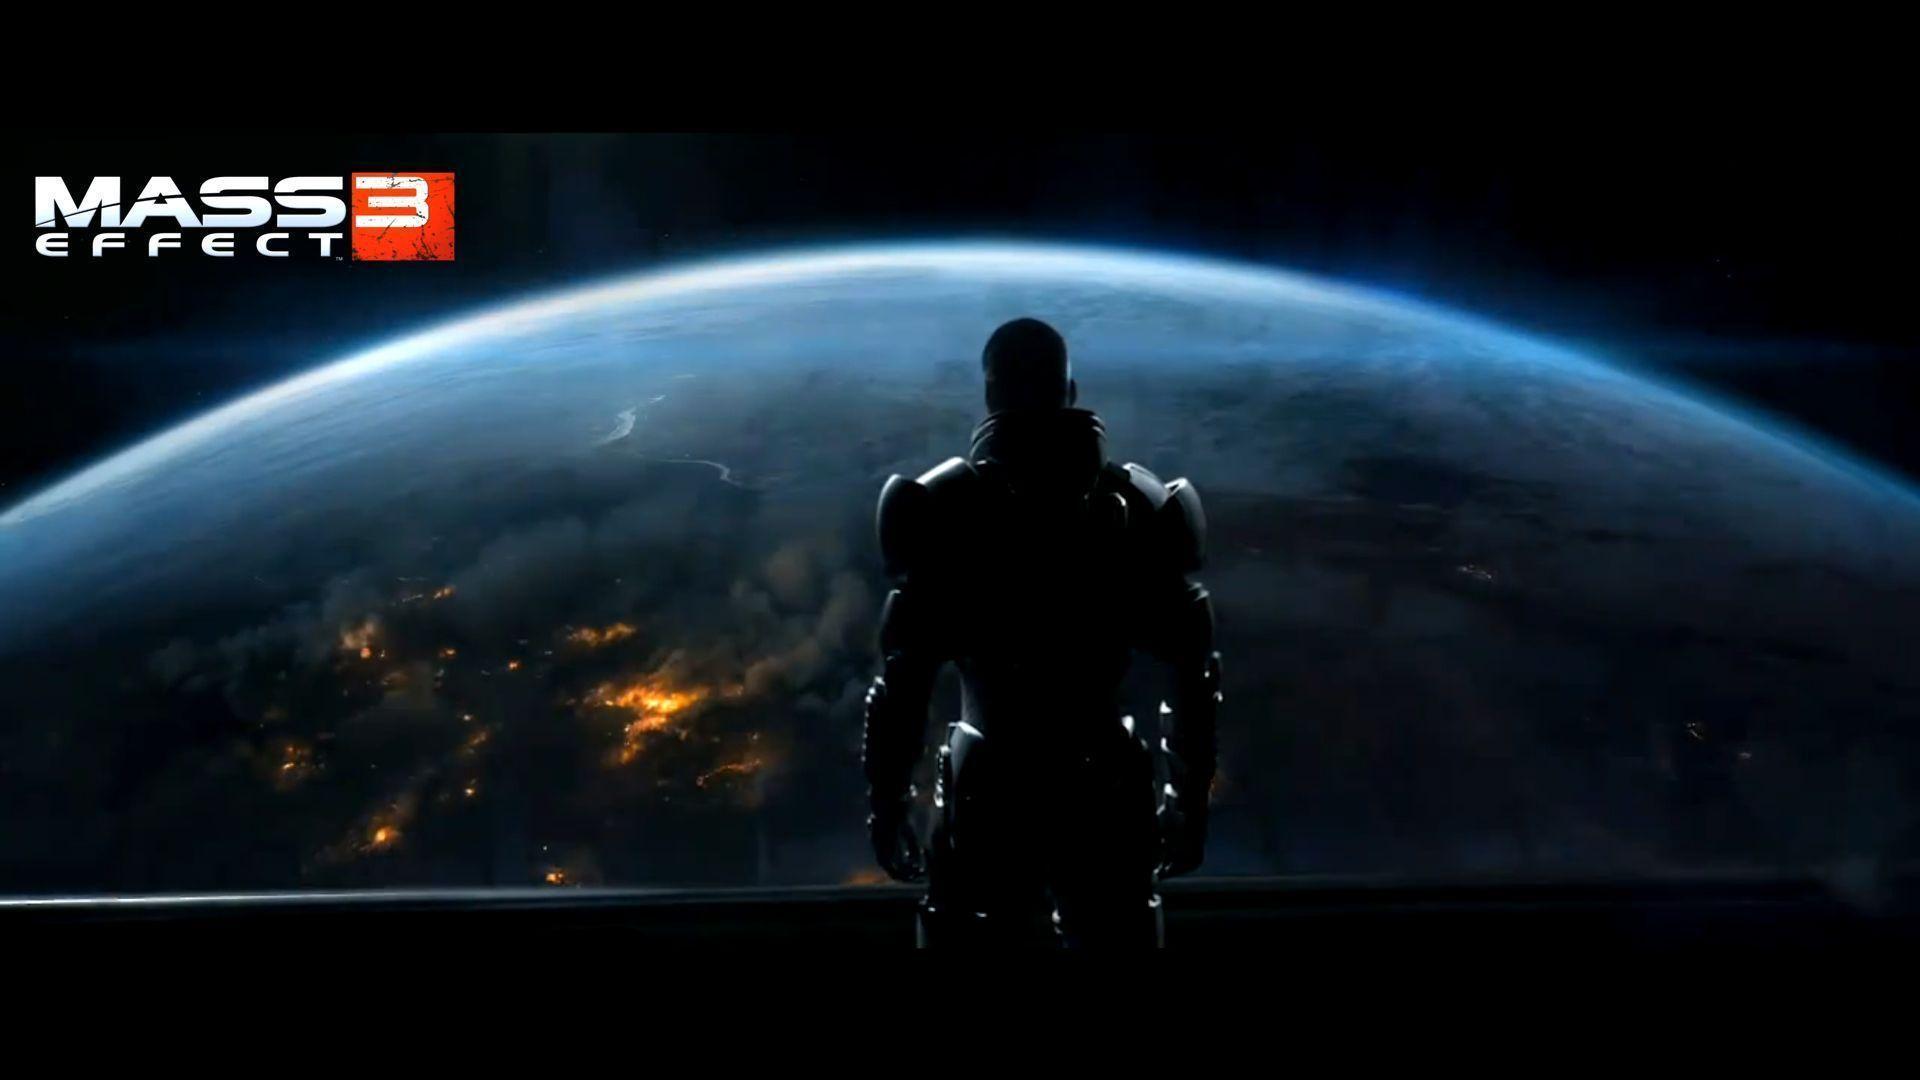 Image For > Mass Effect 3 Earth Wallpapers Hd